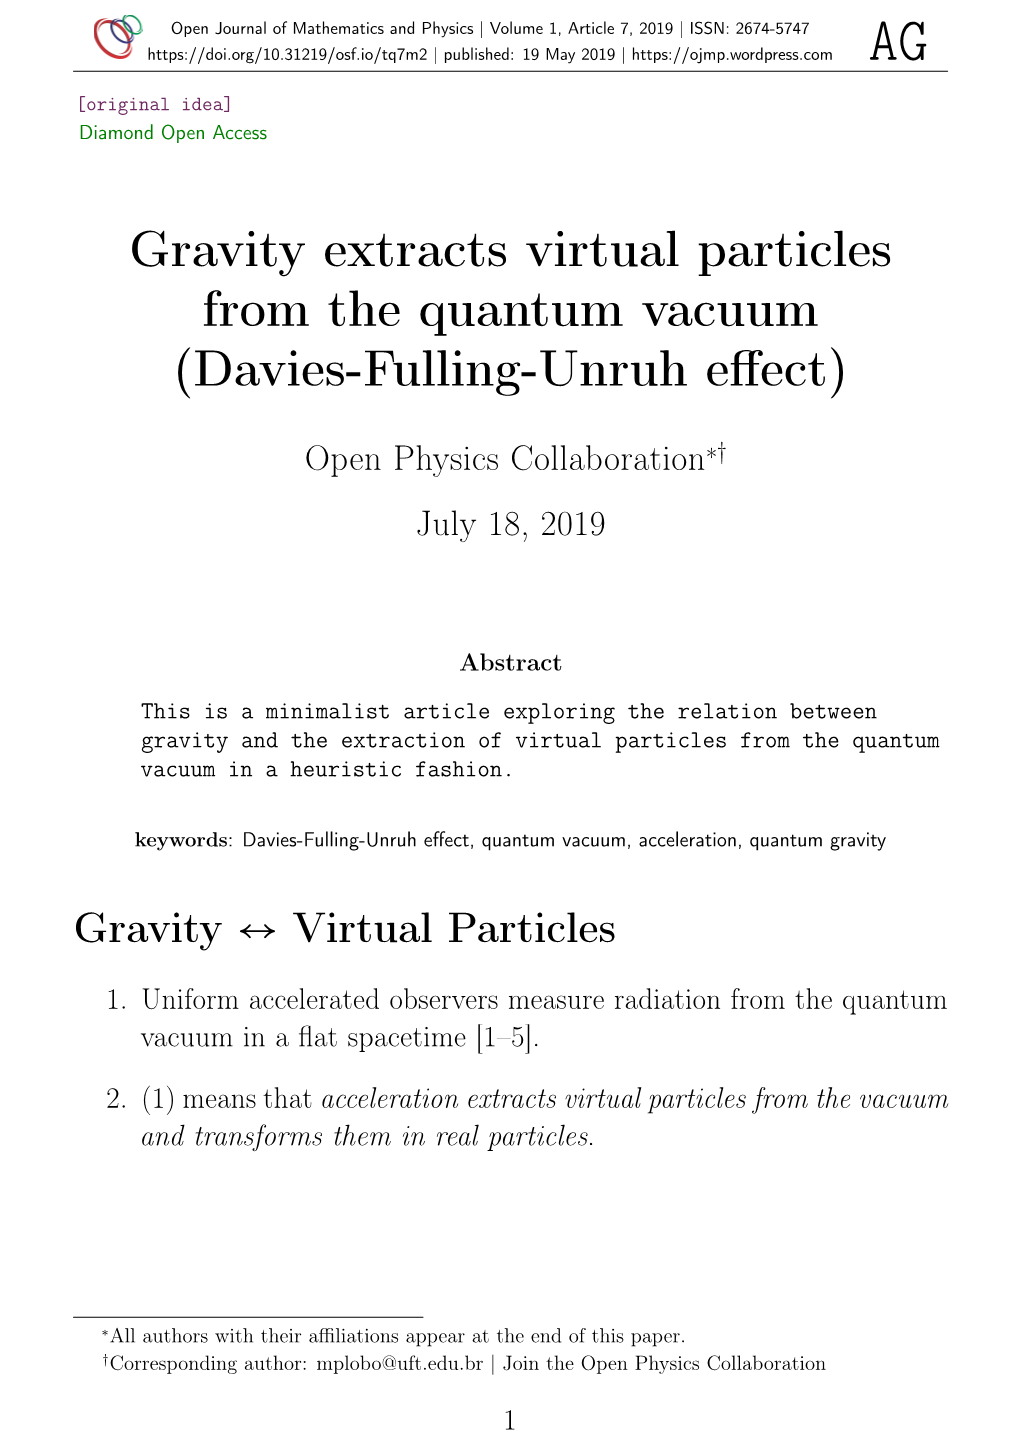 Gravity Extracts Virtual Particles from the Quantum Vacuum (Davies-Fulling-Unruh Eﬀect)